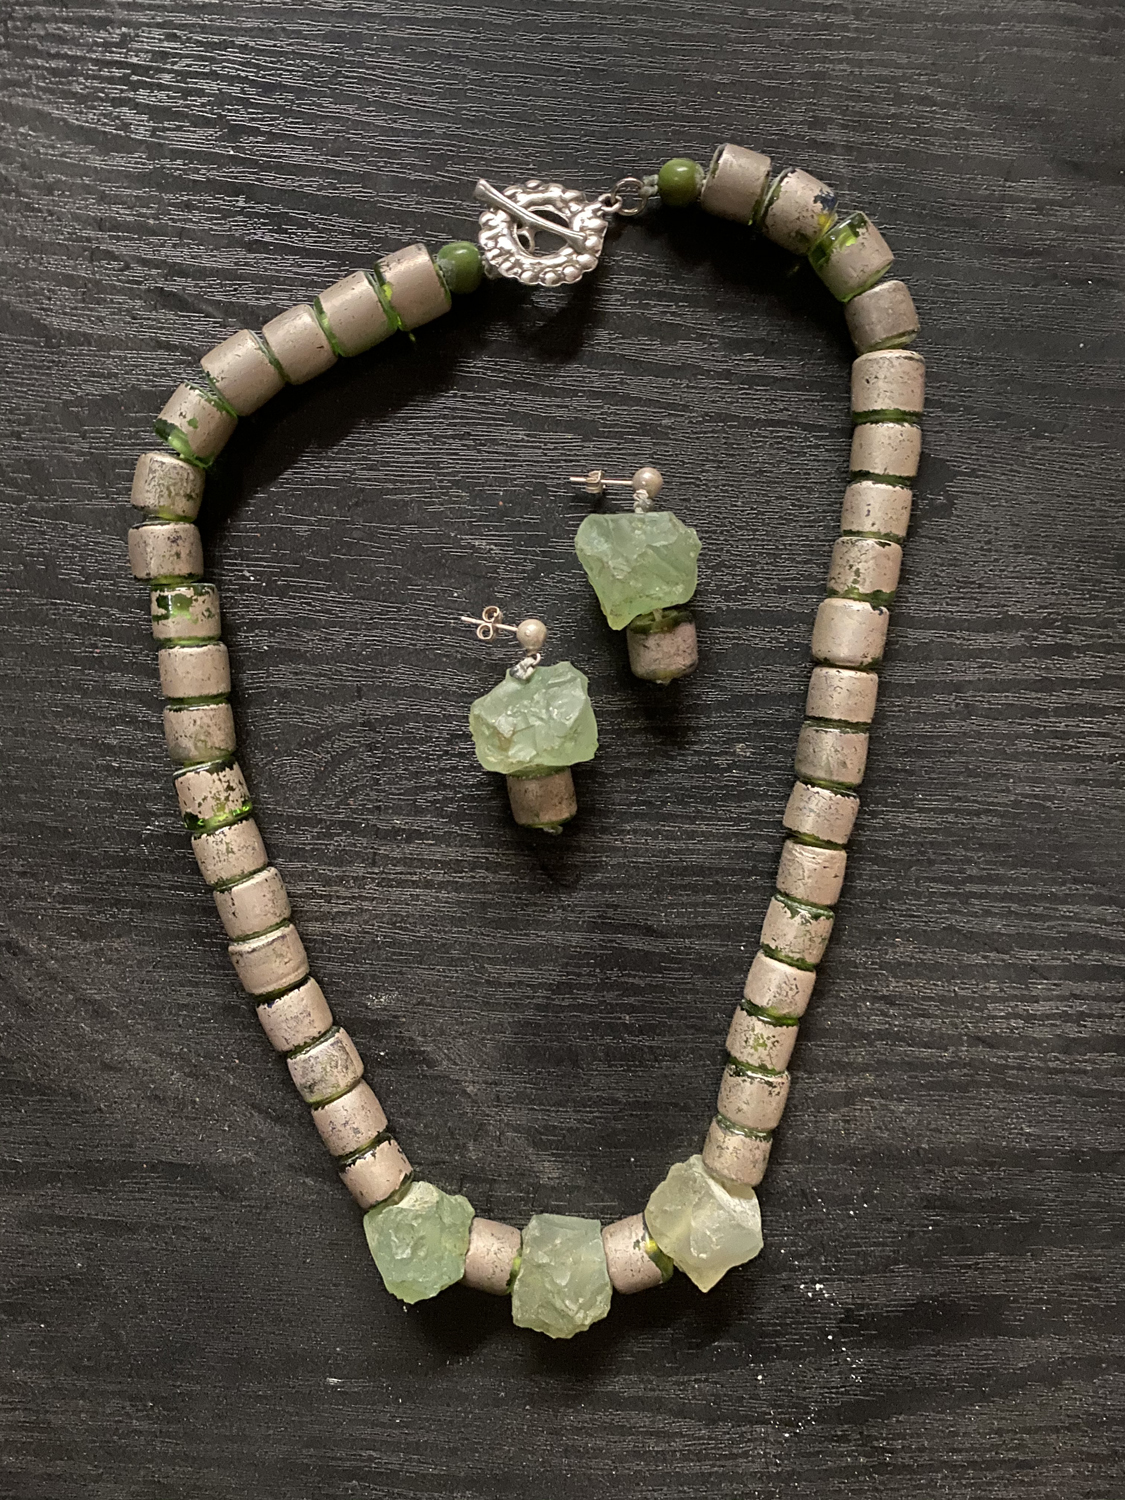 Item 147 - Guttin, Glass necklace and earrings